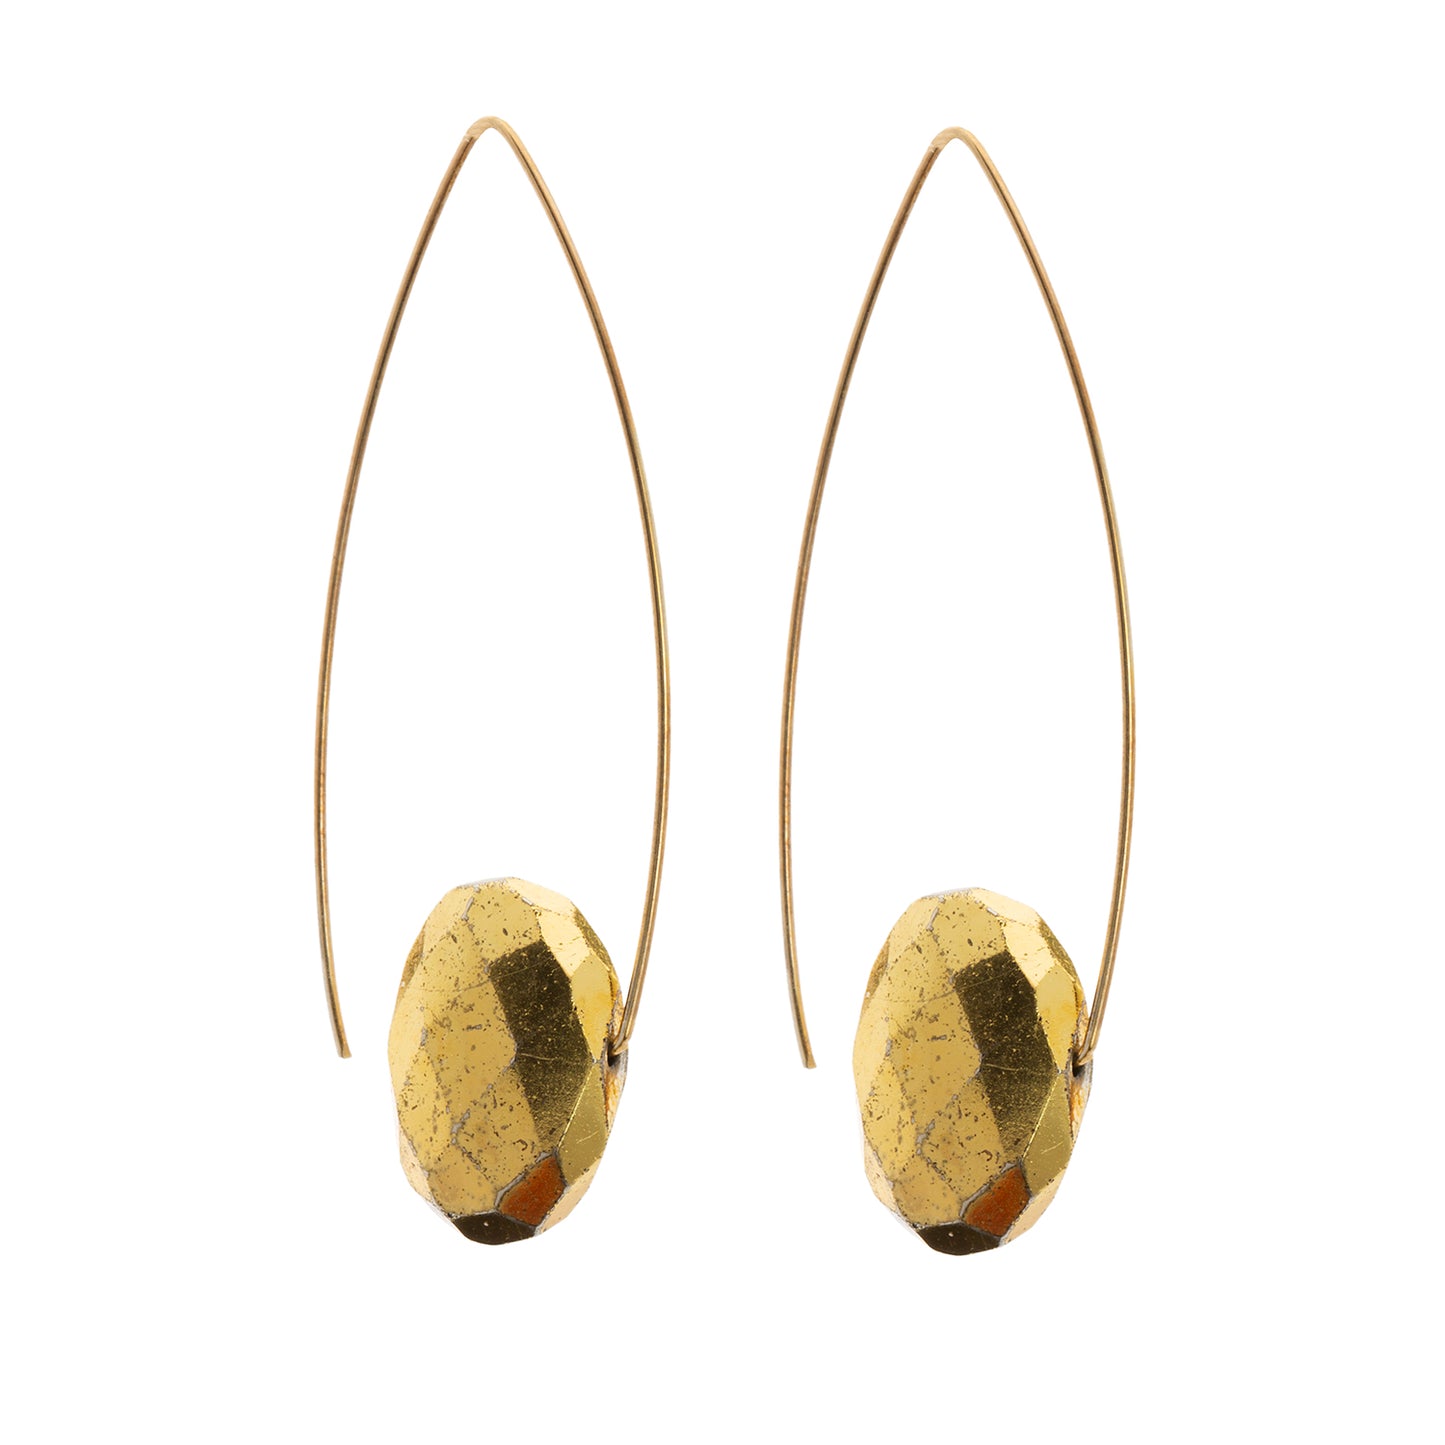 Tall Triangle Earrings with Gold Pyrite